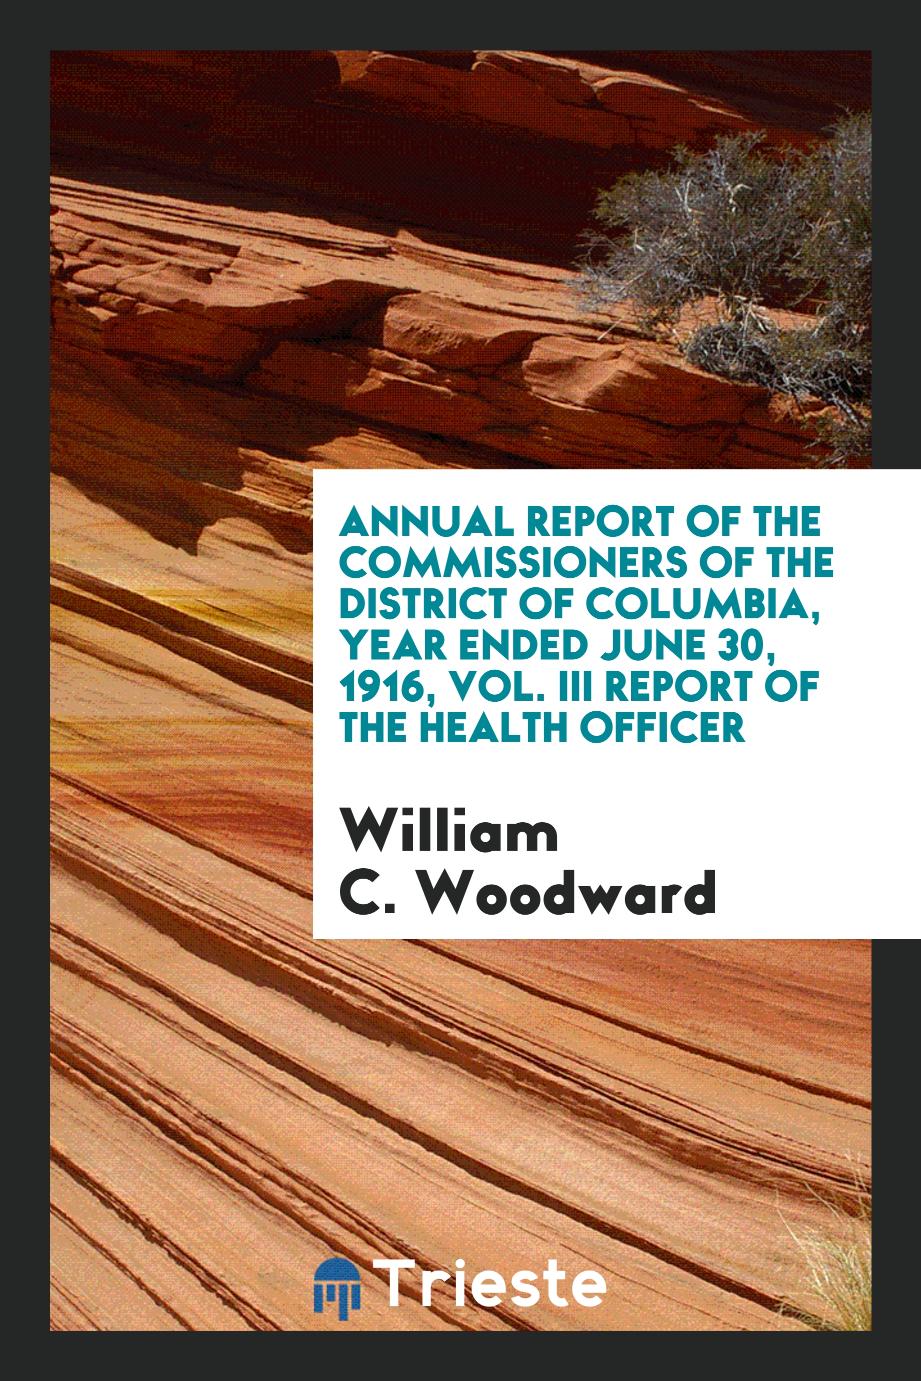 Annual Report of the Commissioners of the District of Columbia, Year Ended June 30, 1916, Vol. III Report of the Health Officer